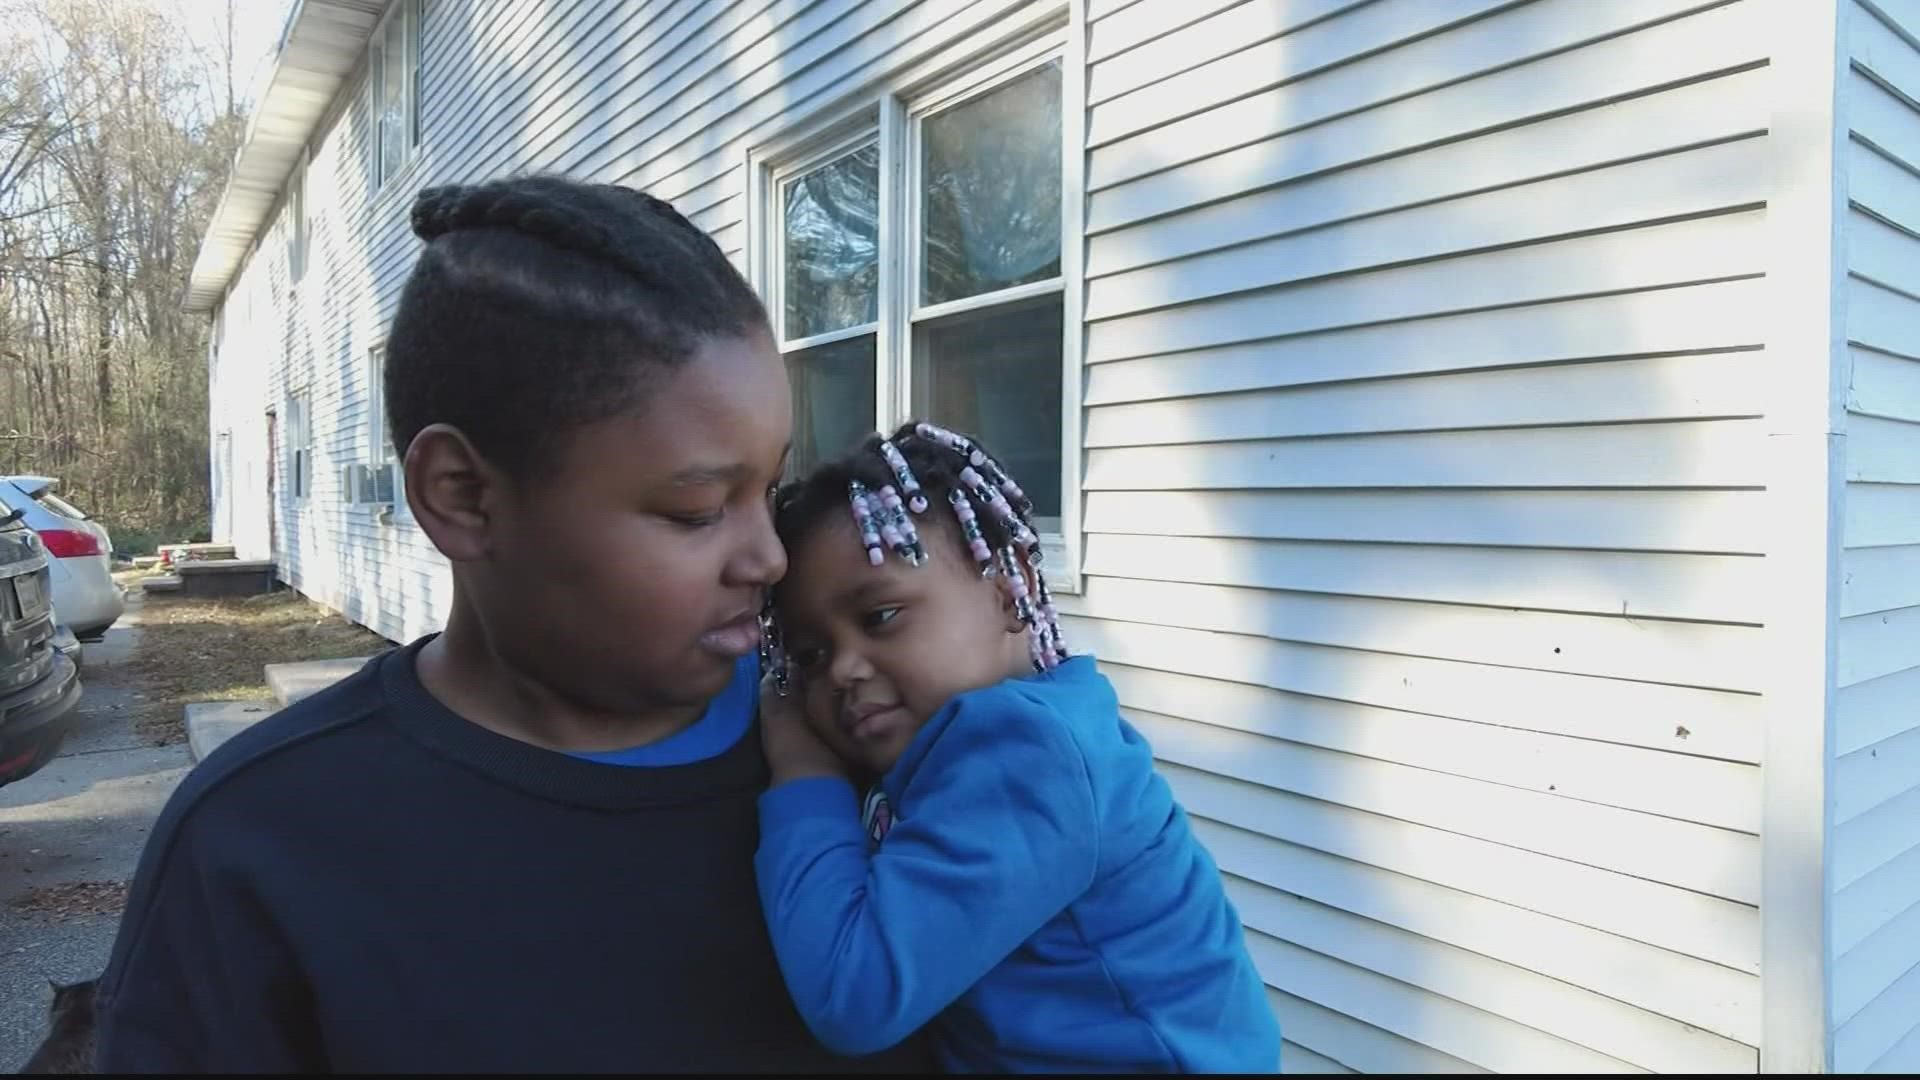 An 11-year-old boy did not let fear get in the way of rescuing his younger sister from a burning apartment in Salisbury, Maryland Tuesday.